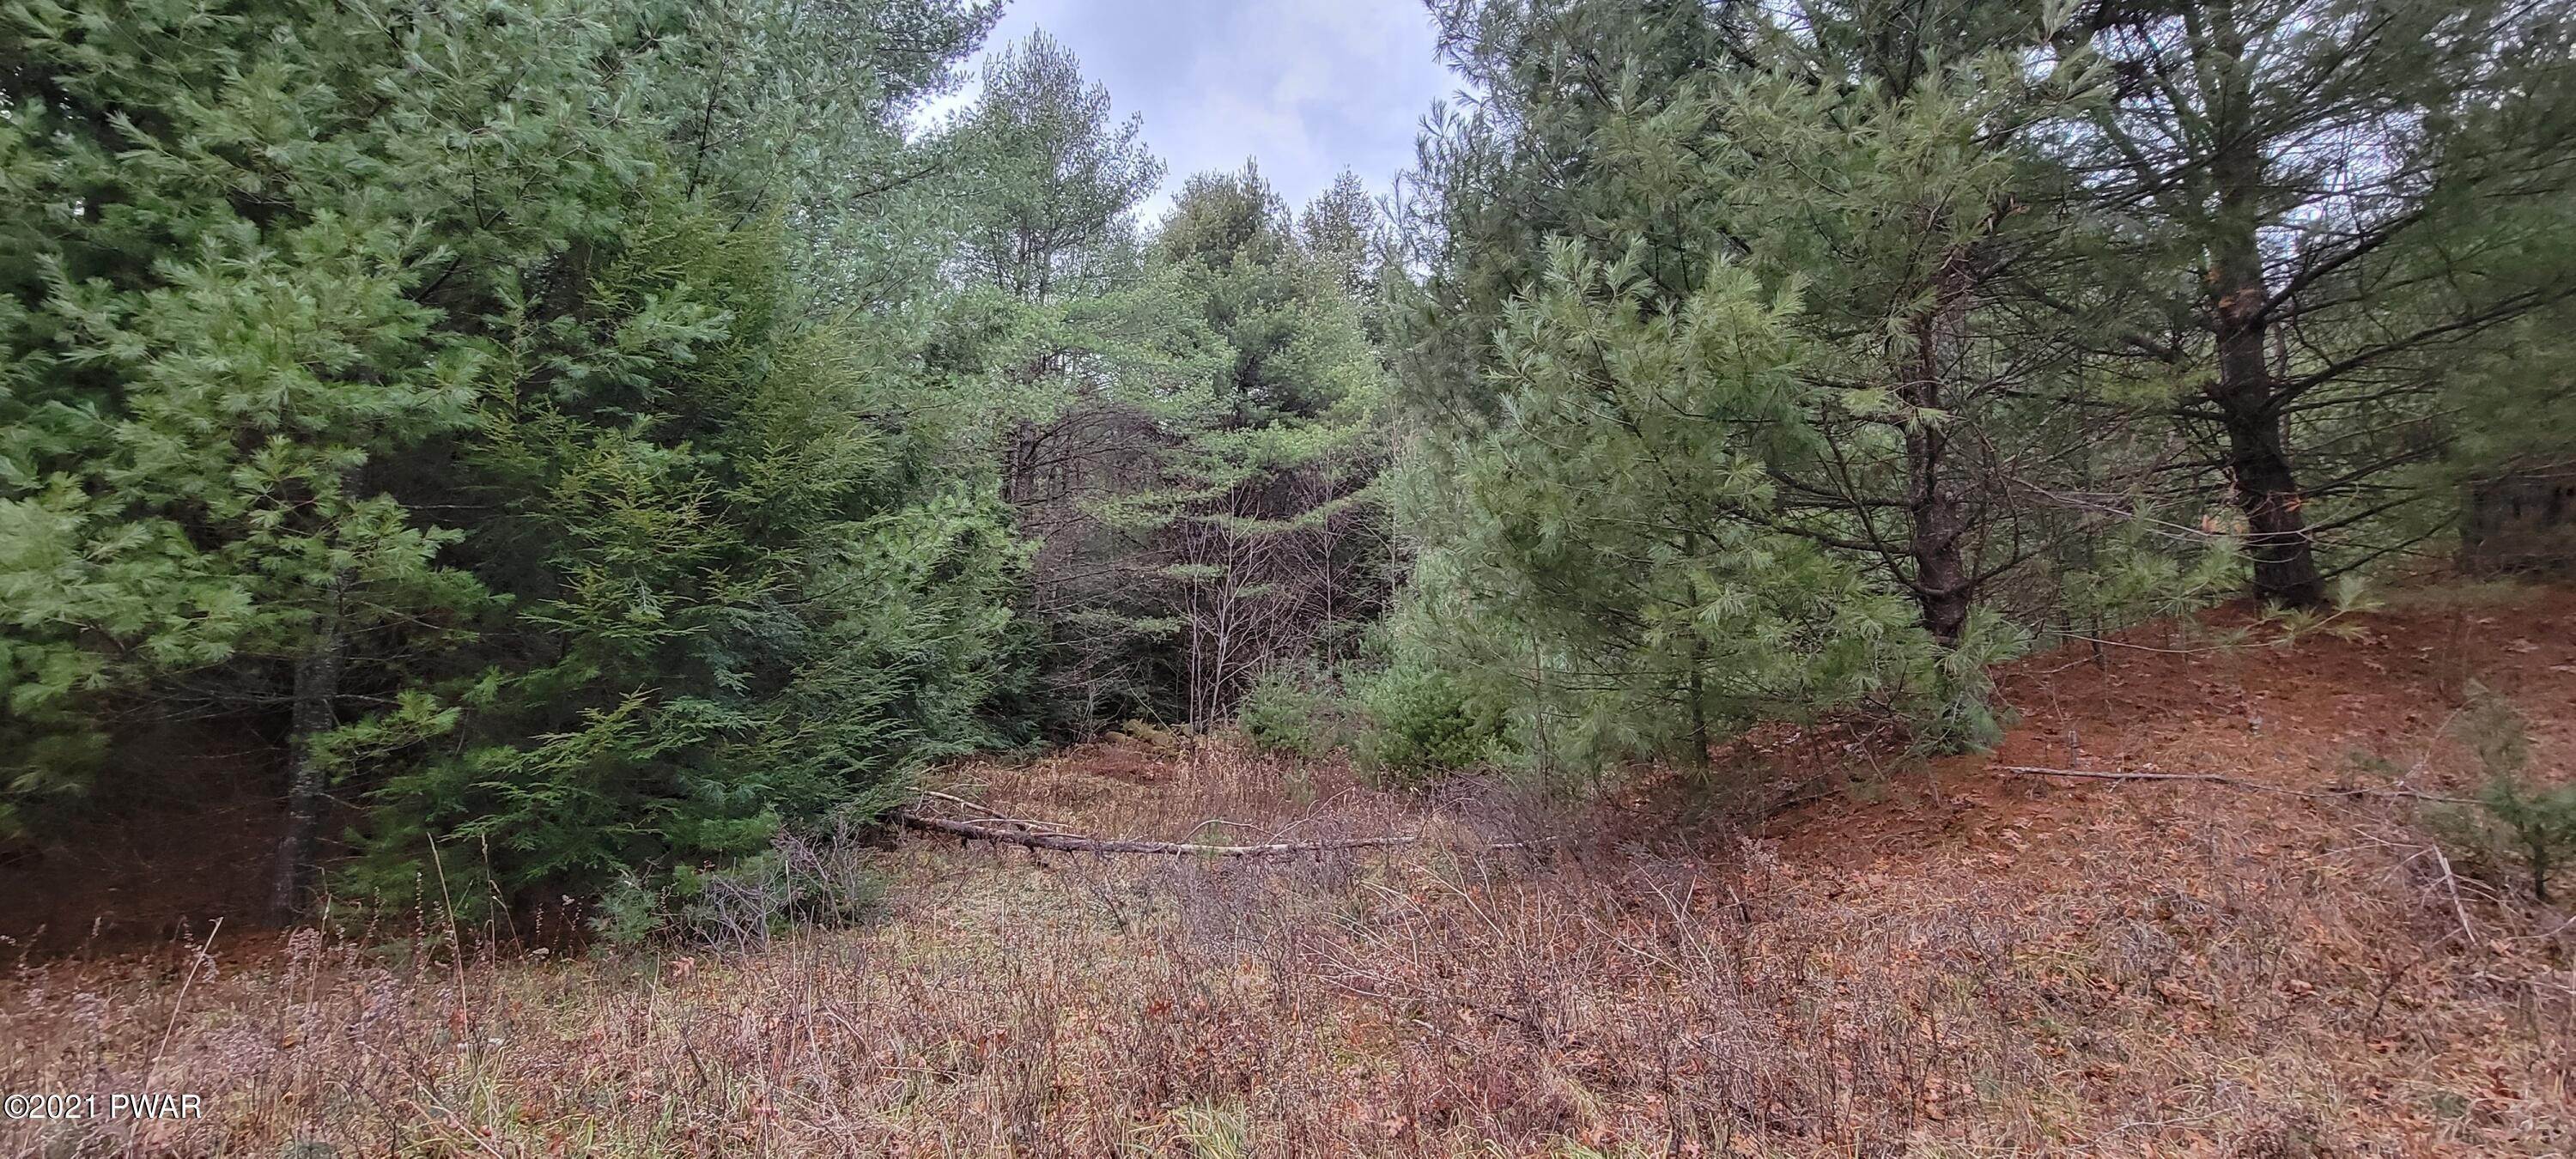 2. Land for Sale at Lot 43 Swamp Pond Rd Narrowsburg, New York 12764 United States